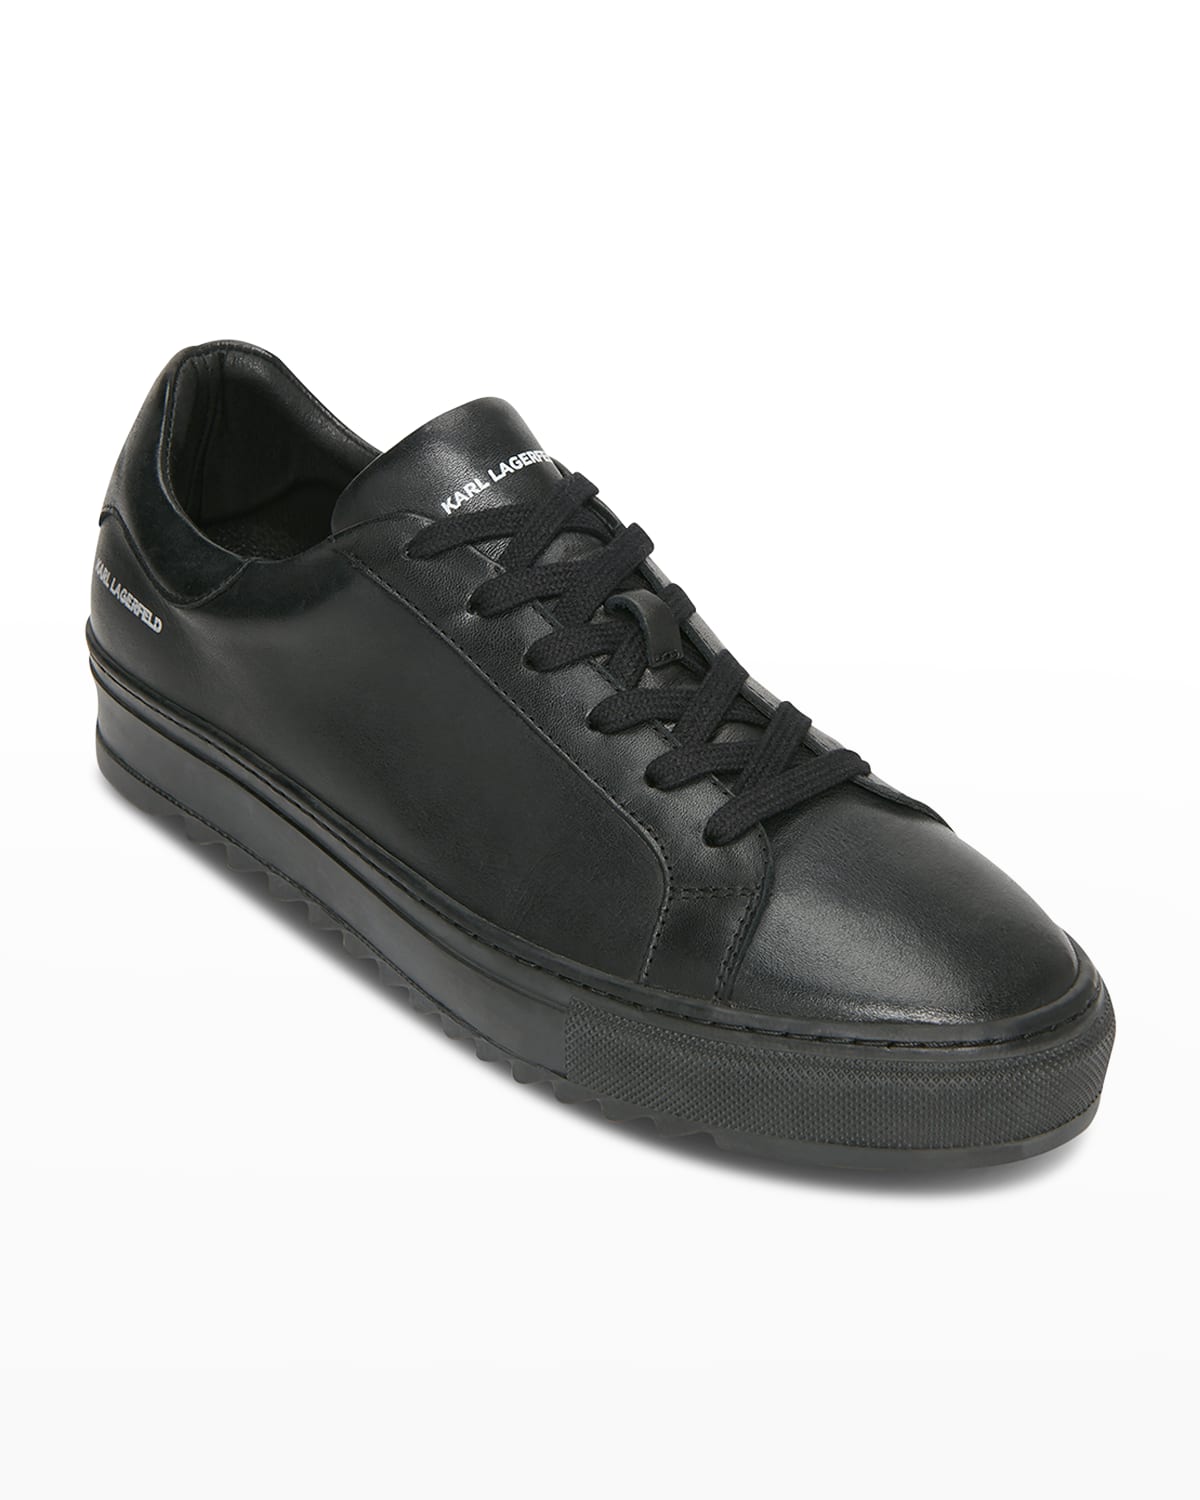 Karl Lagerfeld Paris Men's Camo-Sole Mix-Leather Low-Top Sneakers ...